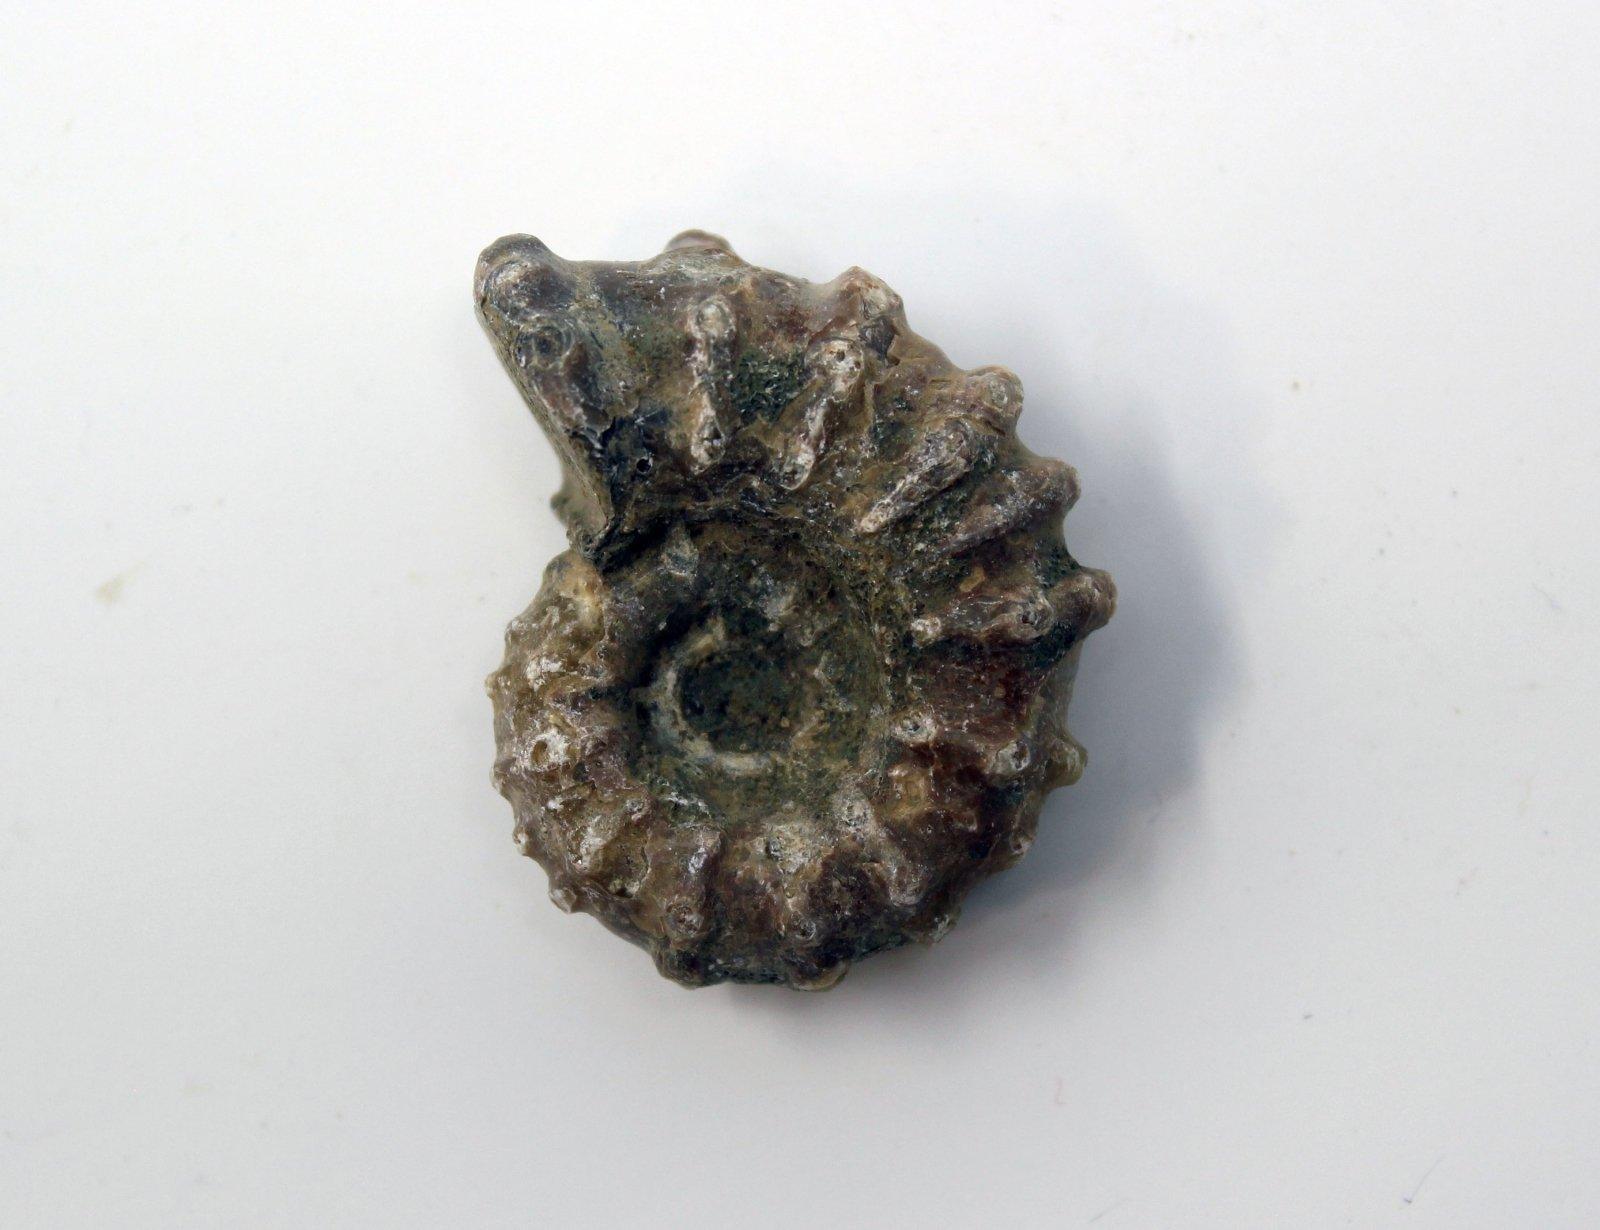 One Fossil Douvilleiceras Ammonite! Ocean Fossil! Fossilized Sea Shell! - LapidaryCentral